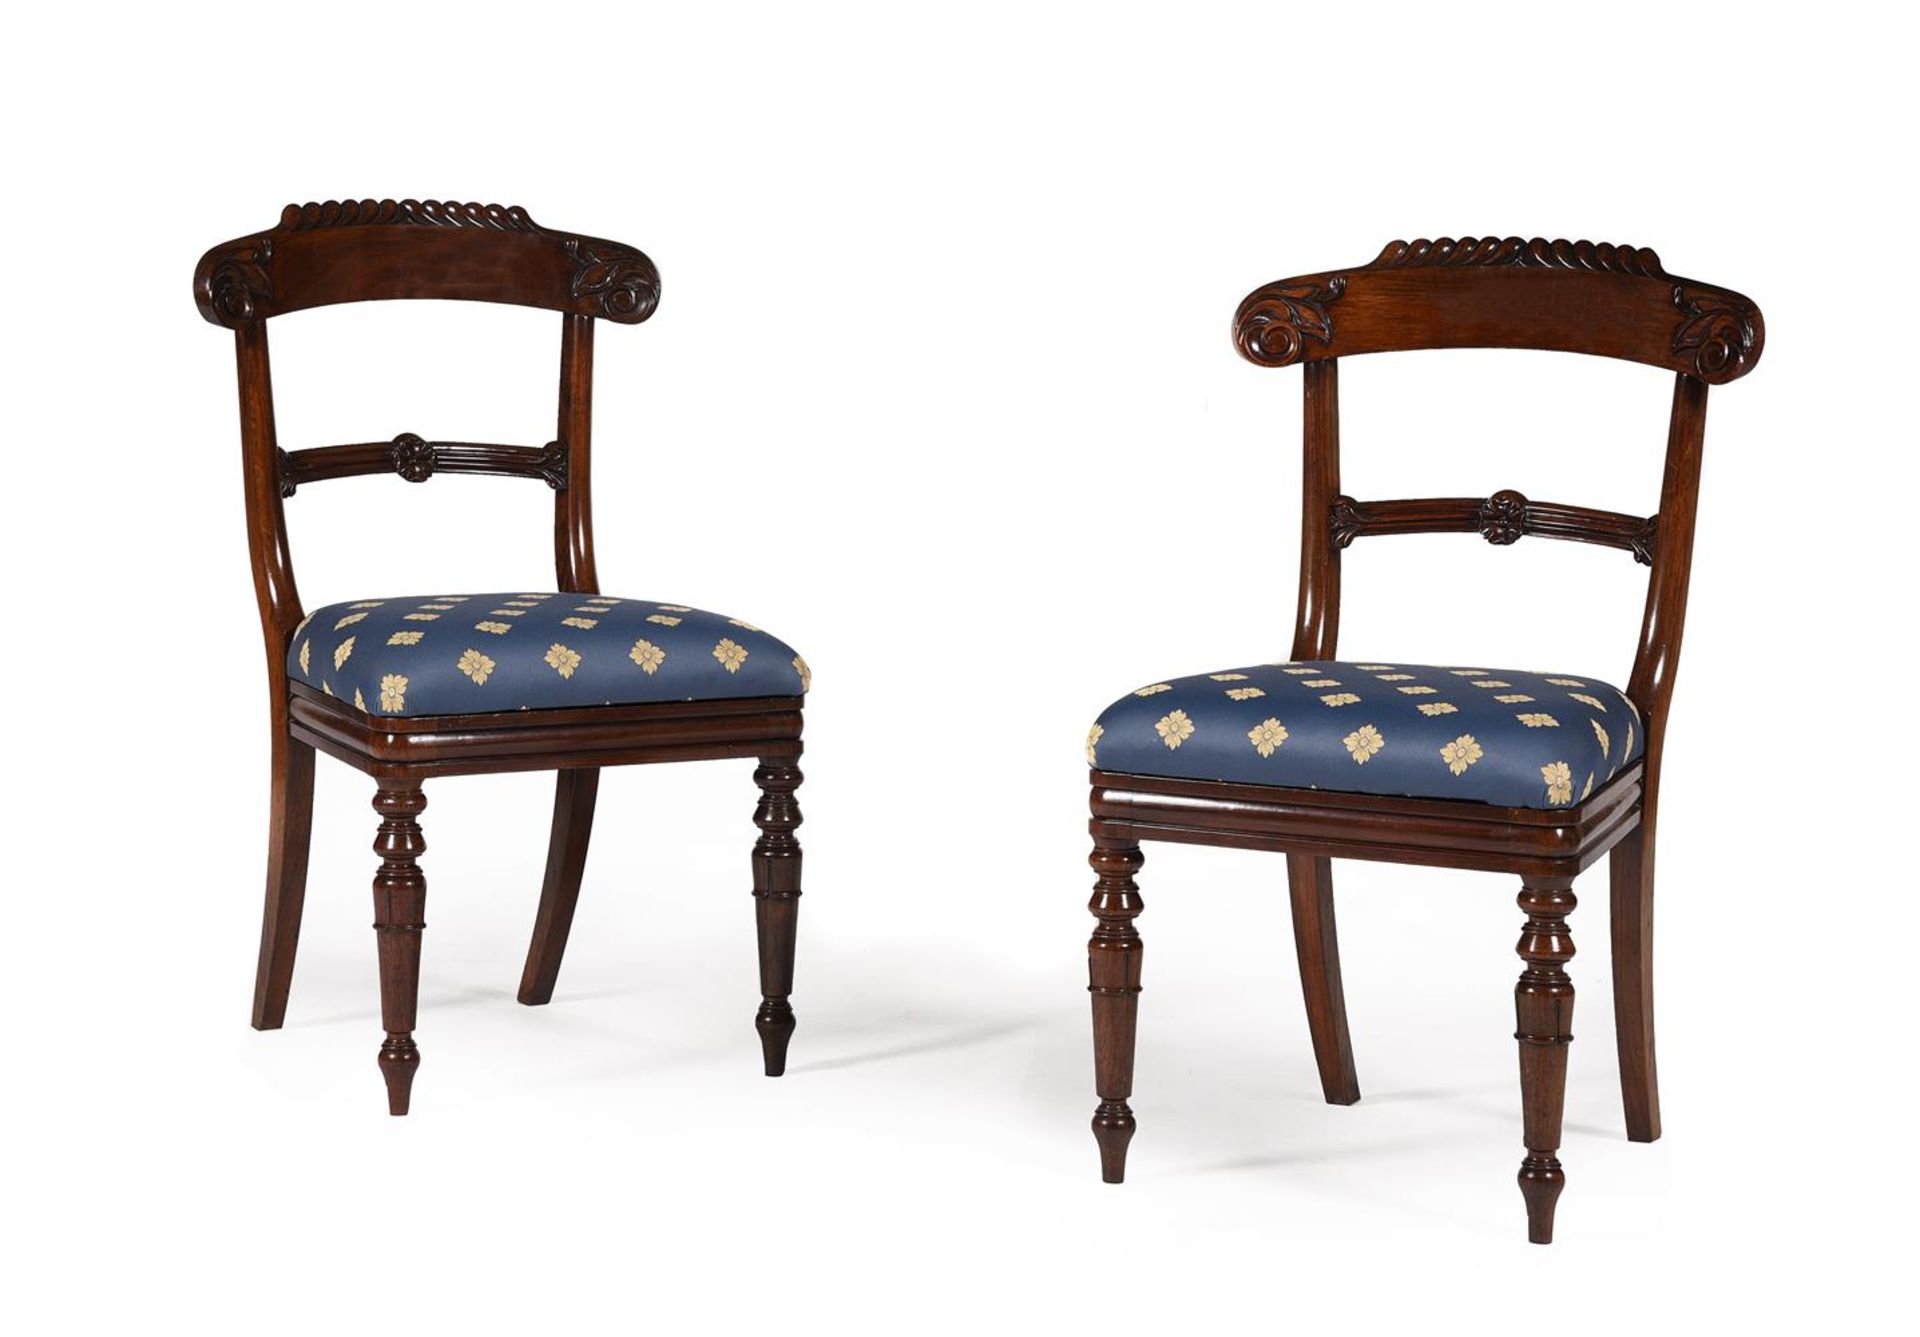 Y A SET OF TEN WILLIAM IV ROSEWOOD DINING CHAIRS, IN THE MANNER OF GILLOWS - Image 2 of 5